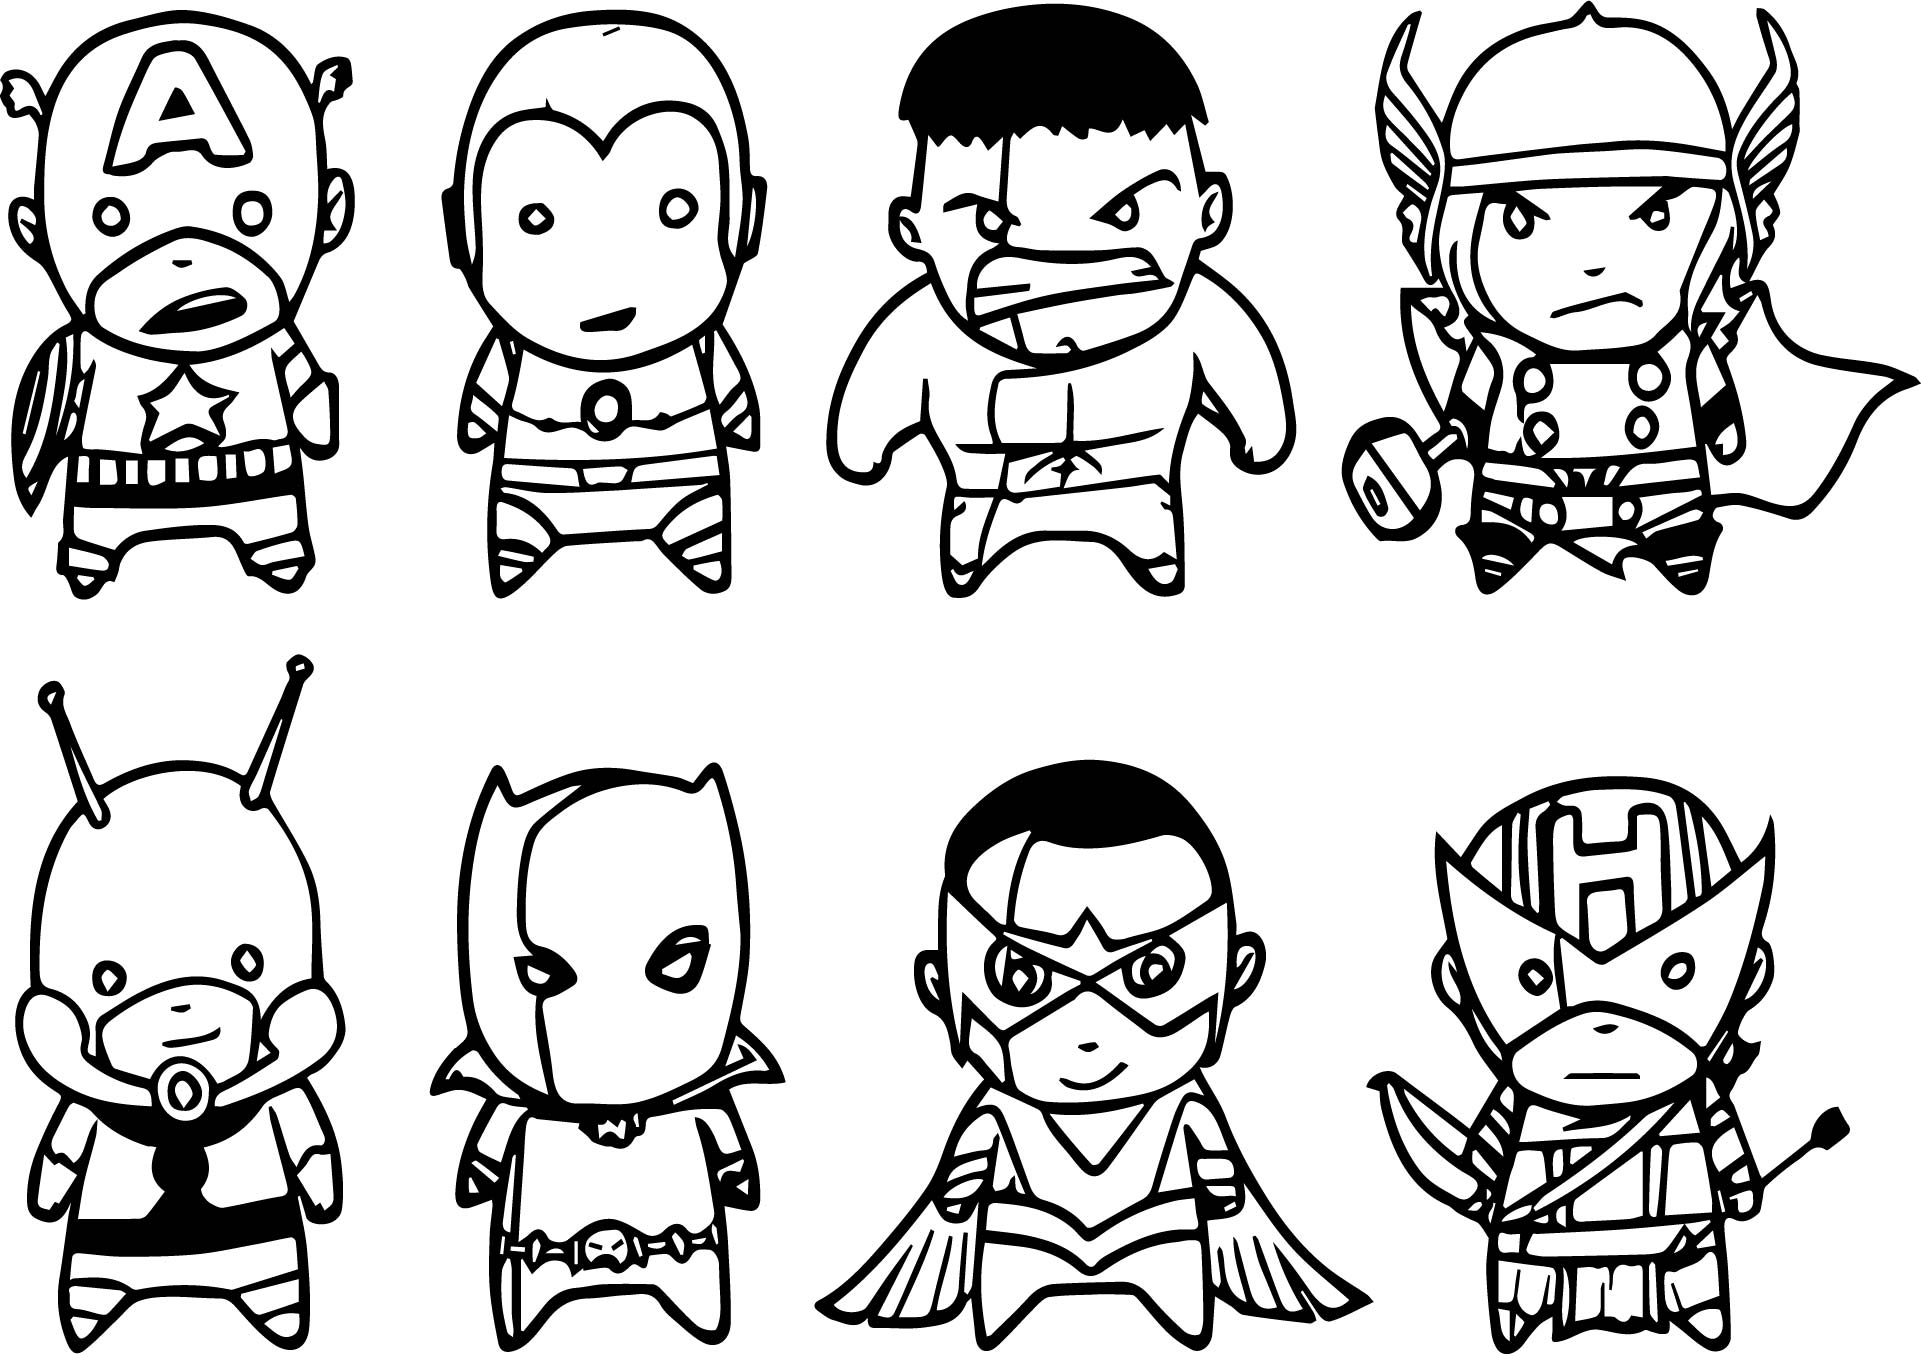 Download 293+ Avengers Superhero Coloring Pages PNG PDF File